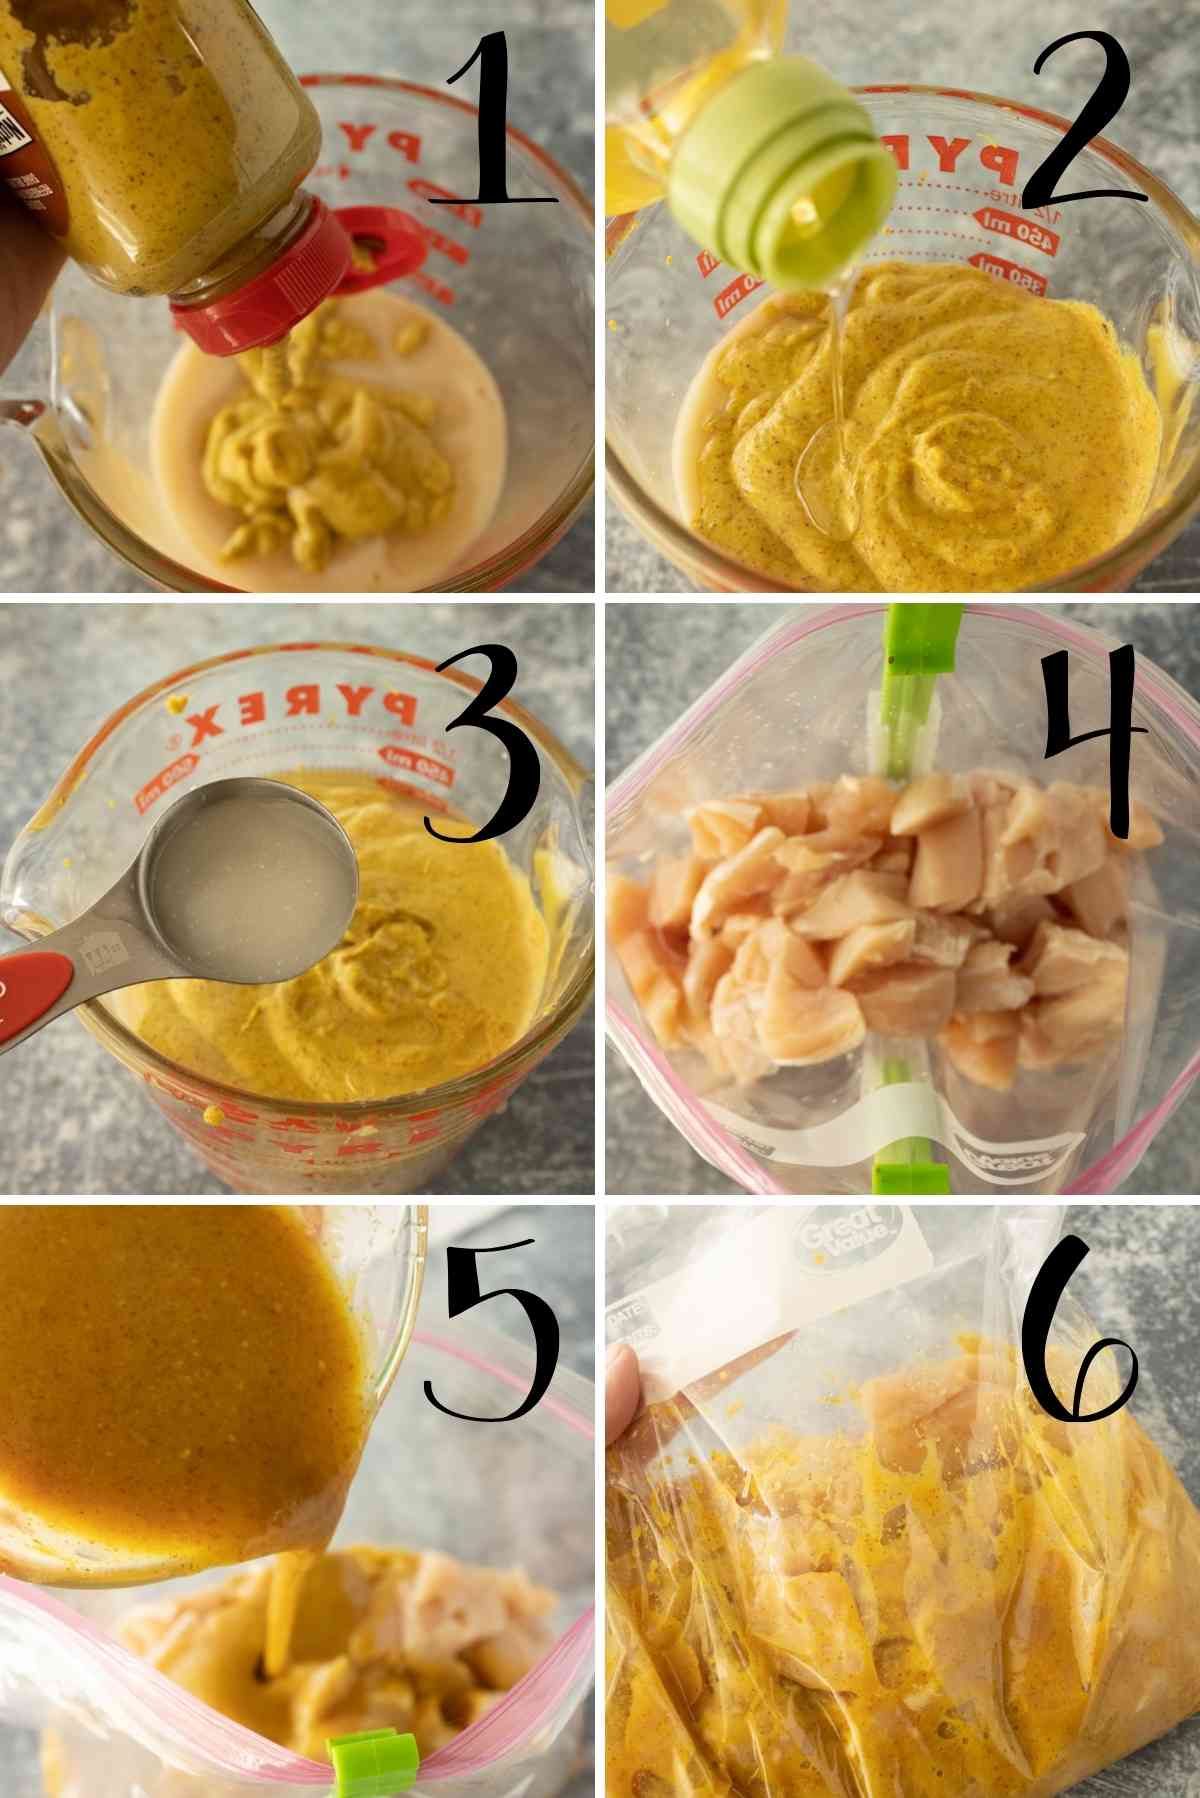 How to mix up the honey mustard marinade and sauce.